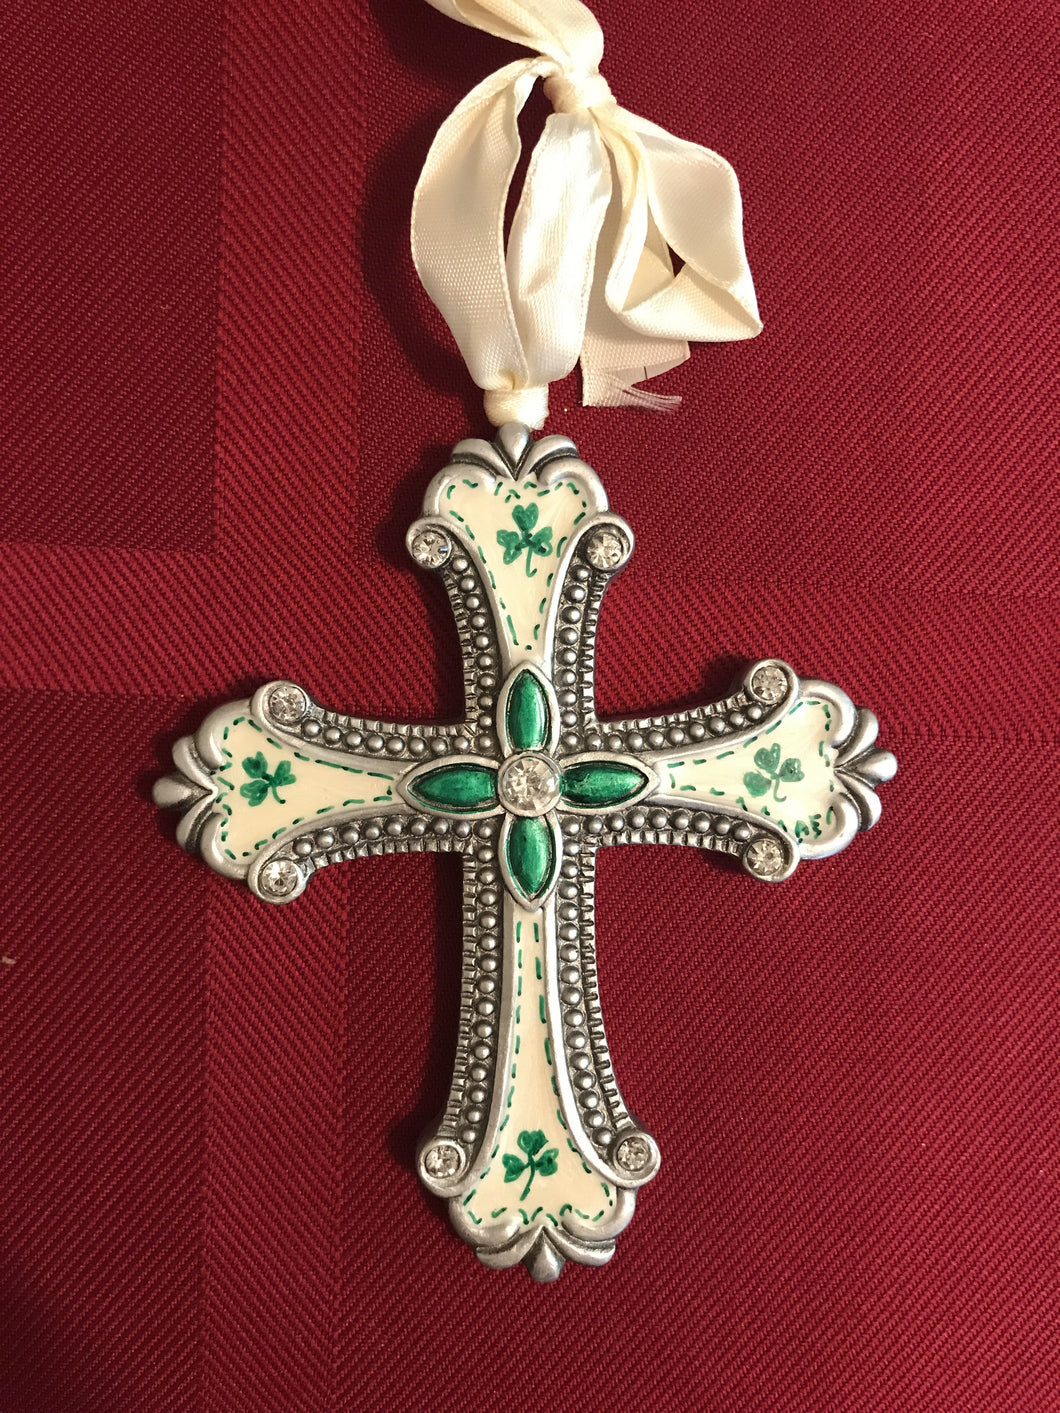 Hand painted cross with Shamrocks